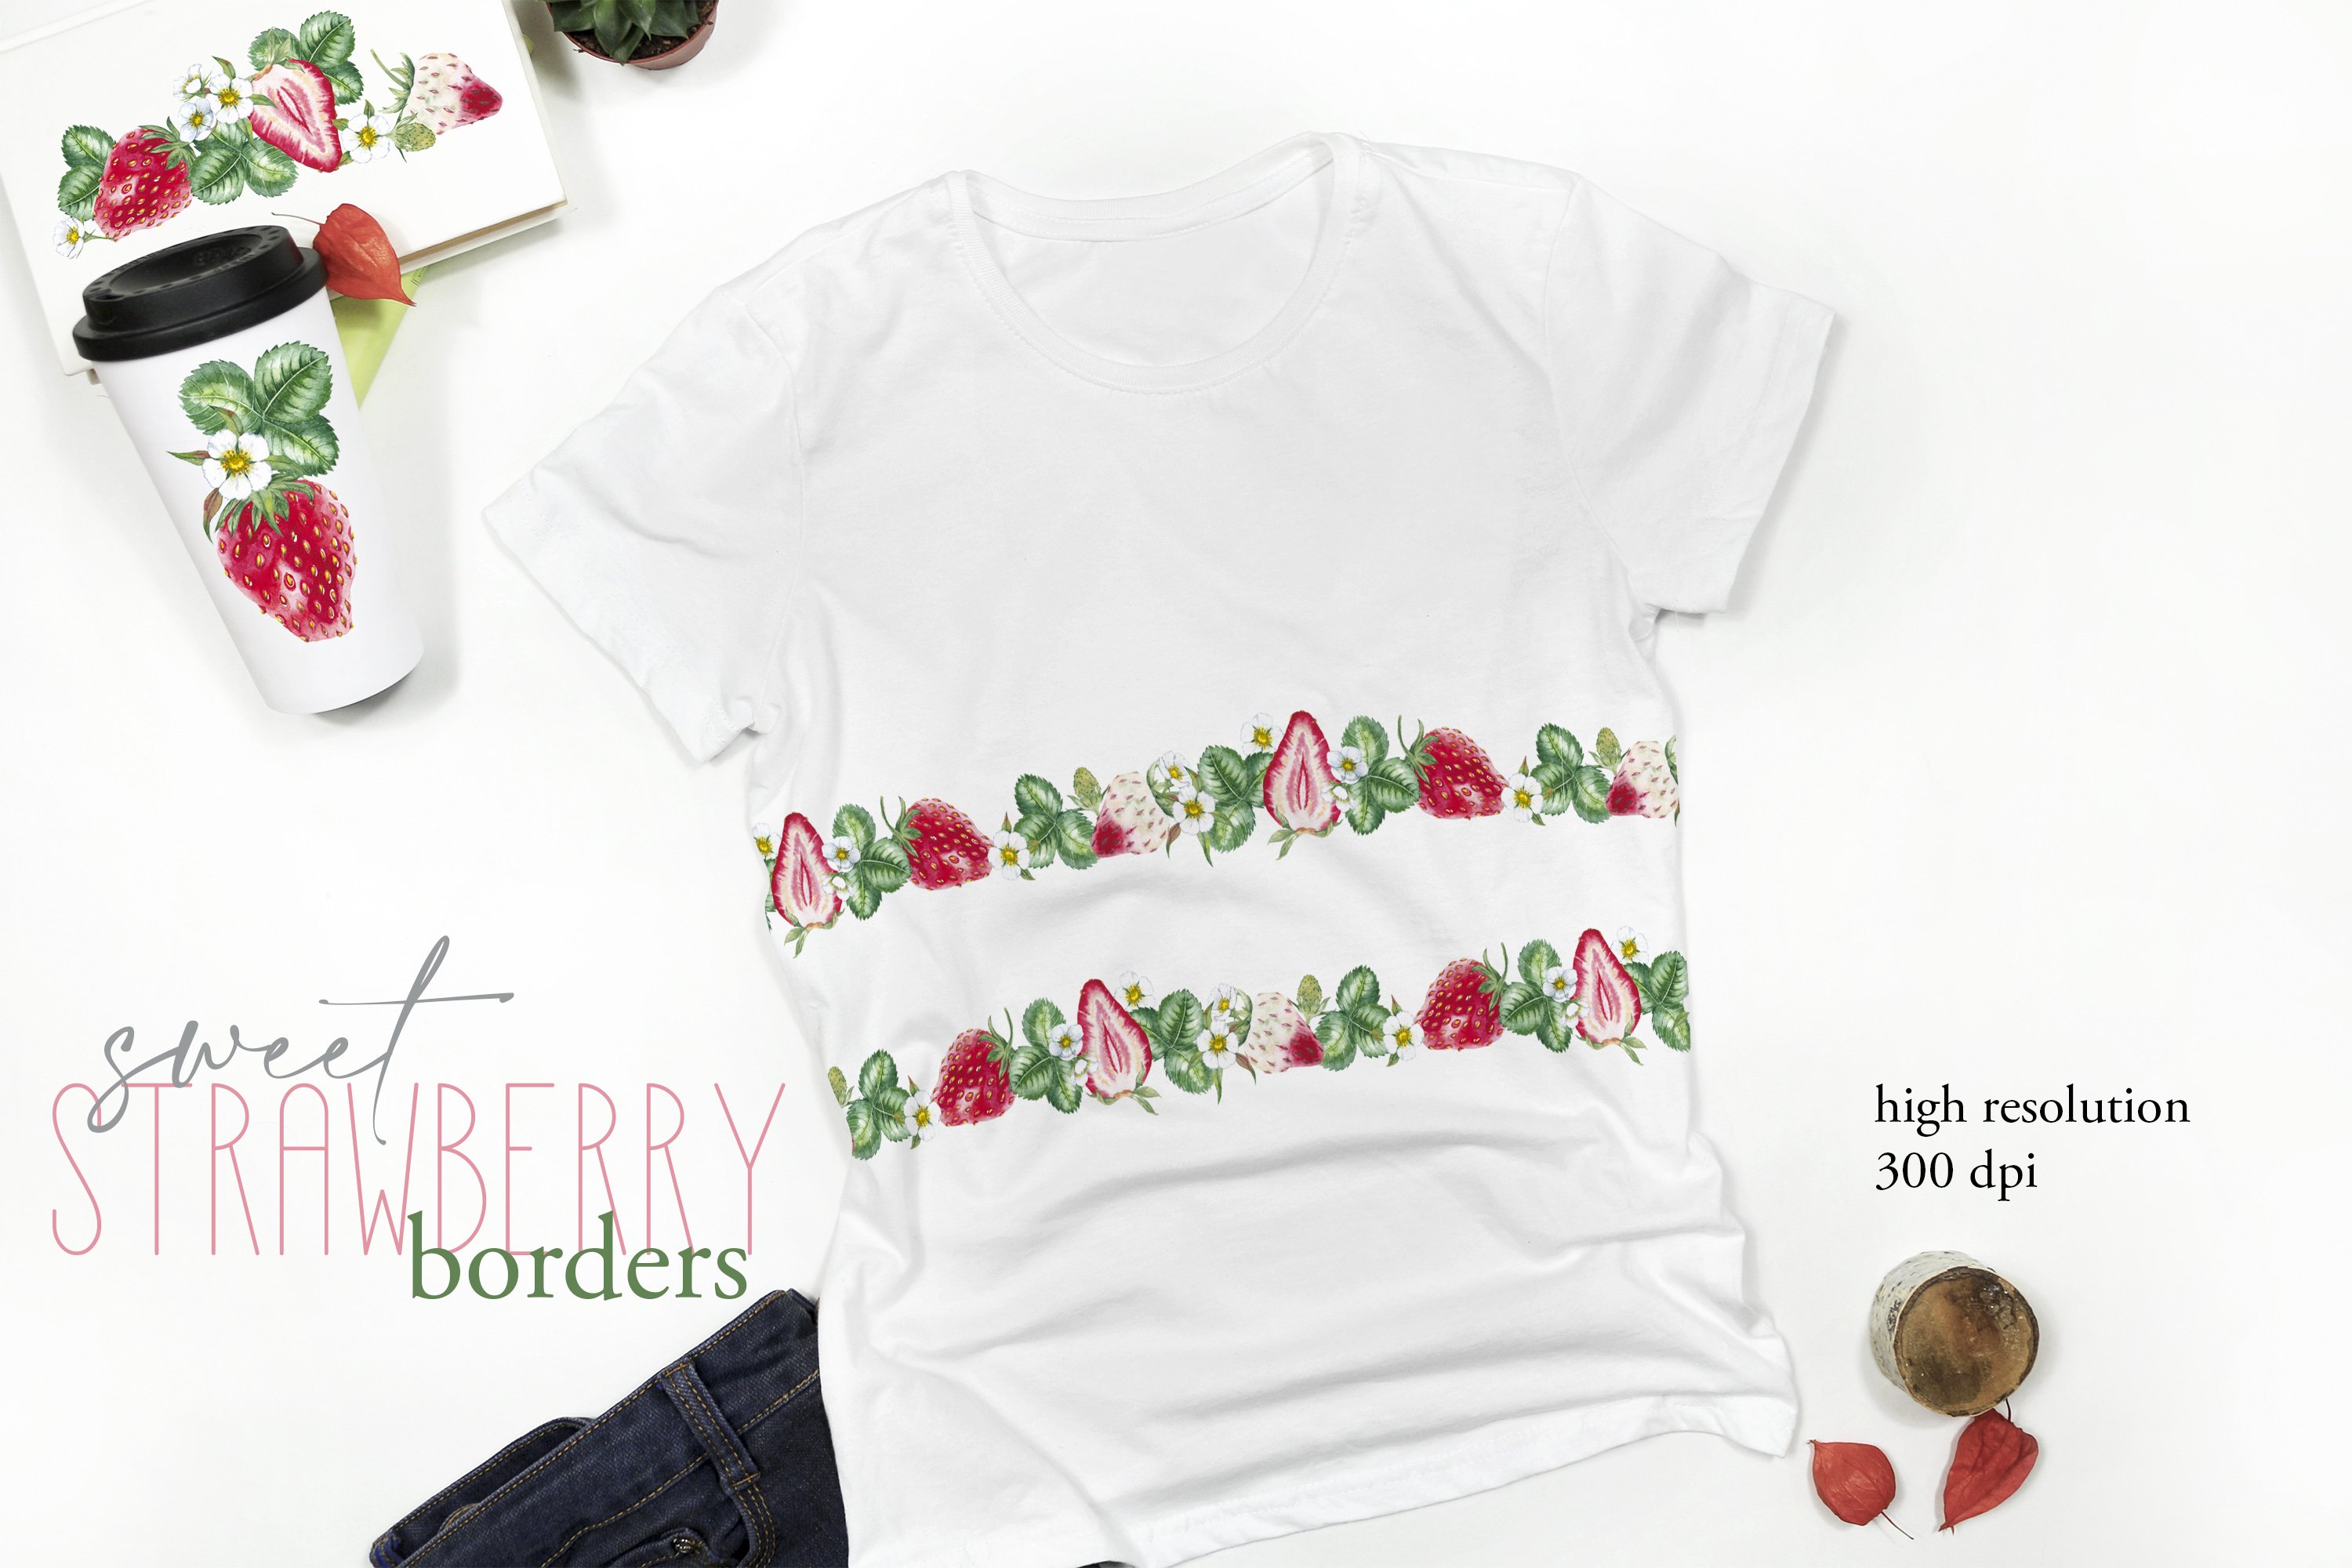 White t-shirt with 2 strawberry sweet borders.